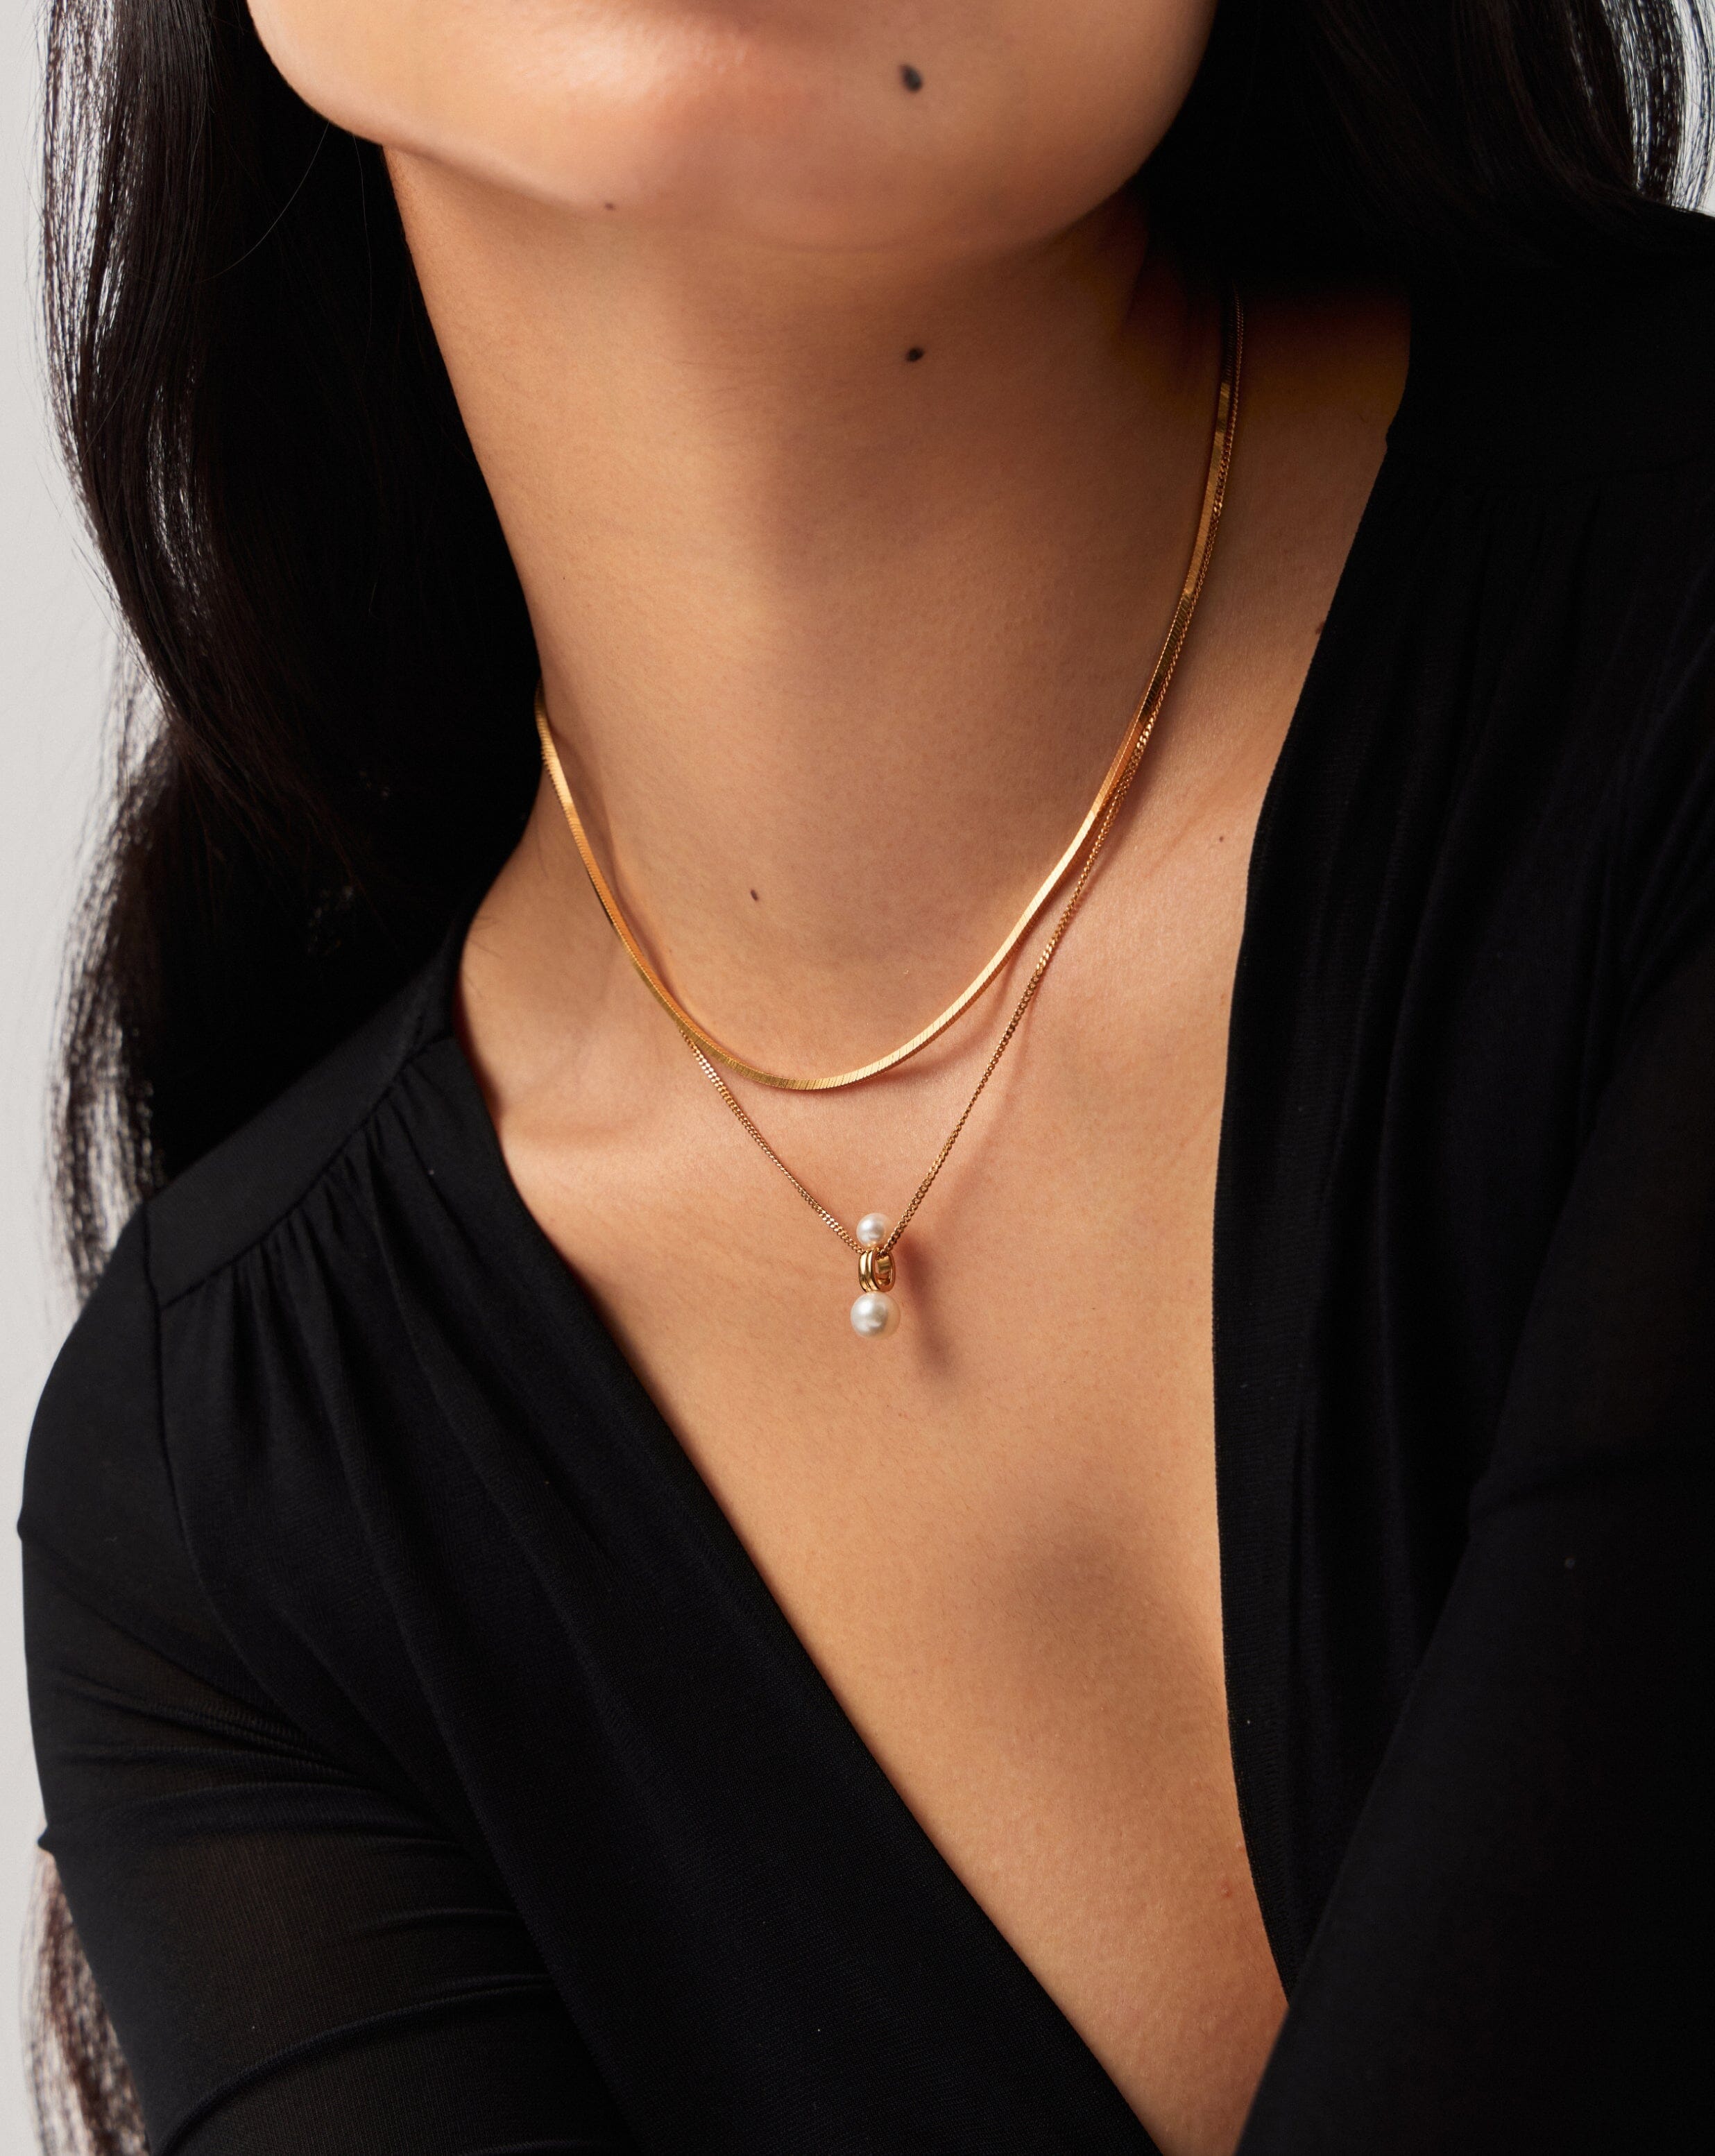 Pearl Ridge Pendant Chain Necklace | 18k Gold Plated Vermeil/Pearl Necklaces Missoma 